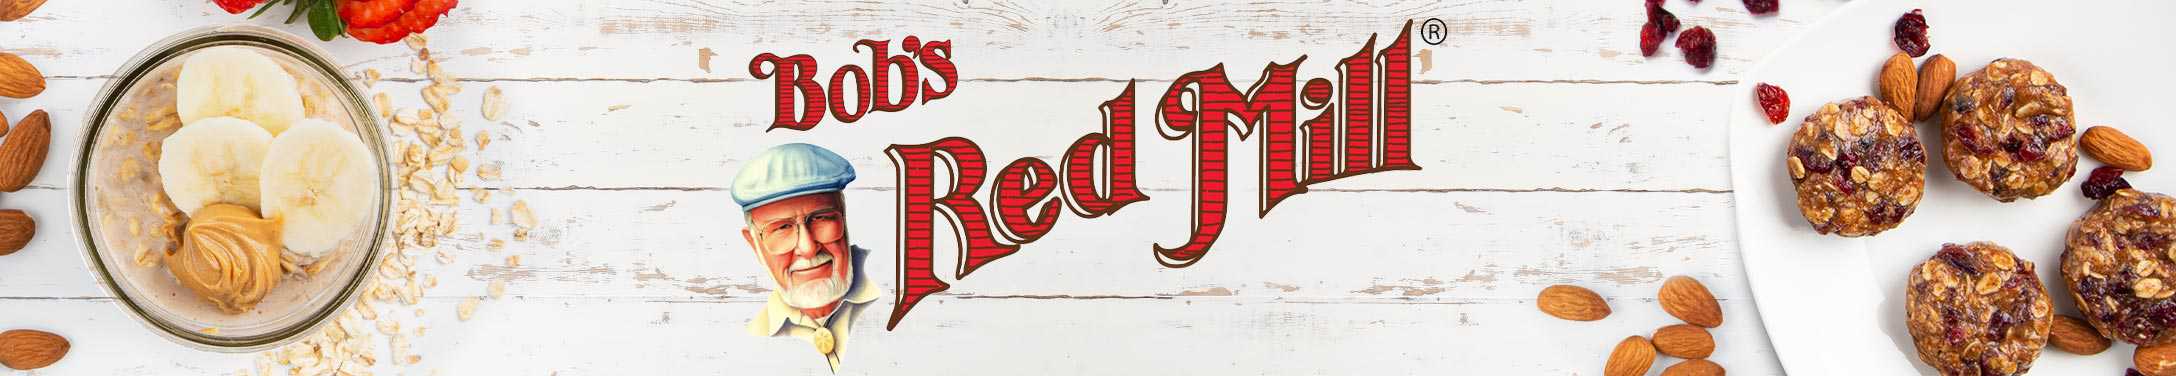 Bob's Red Mill logo next to oat-based foods